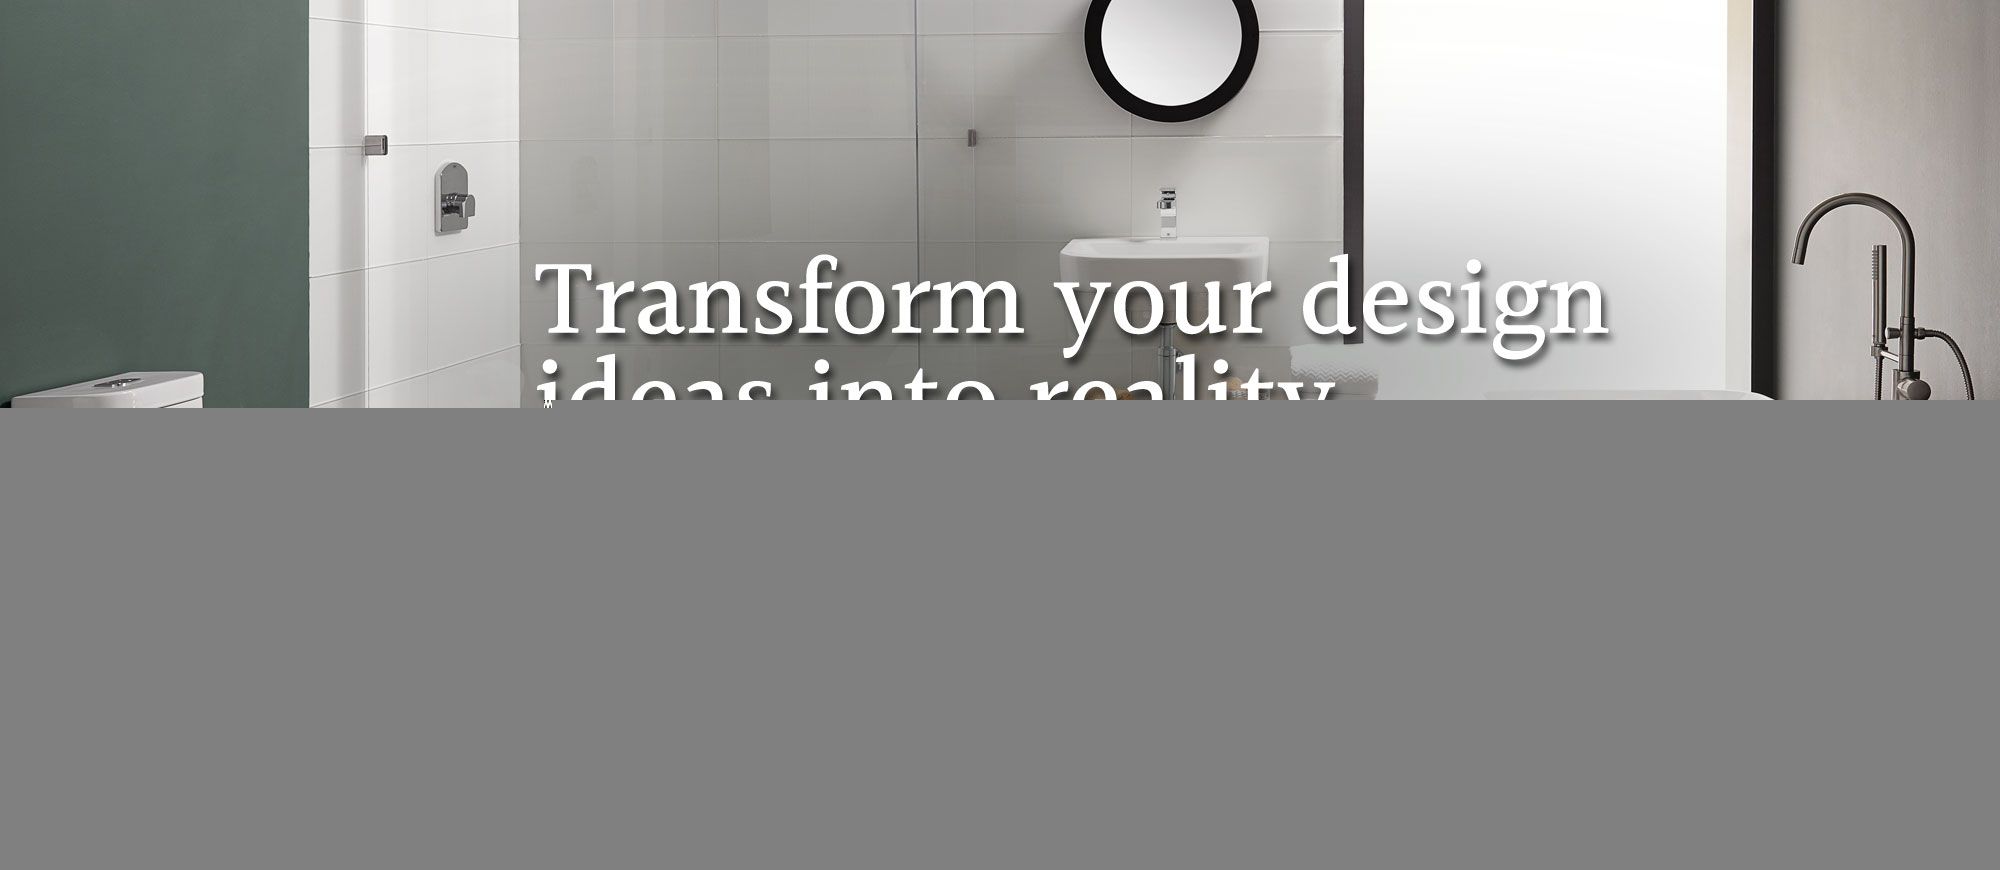 Transform your design ideas into reality with TAPS